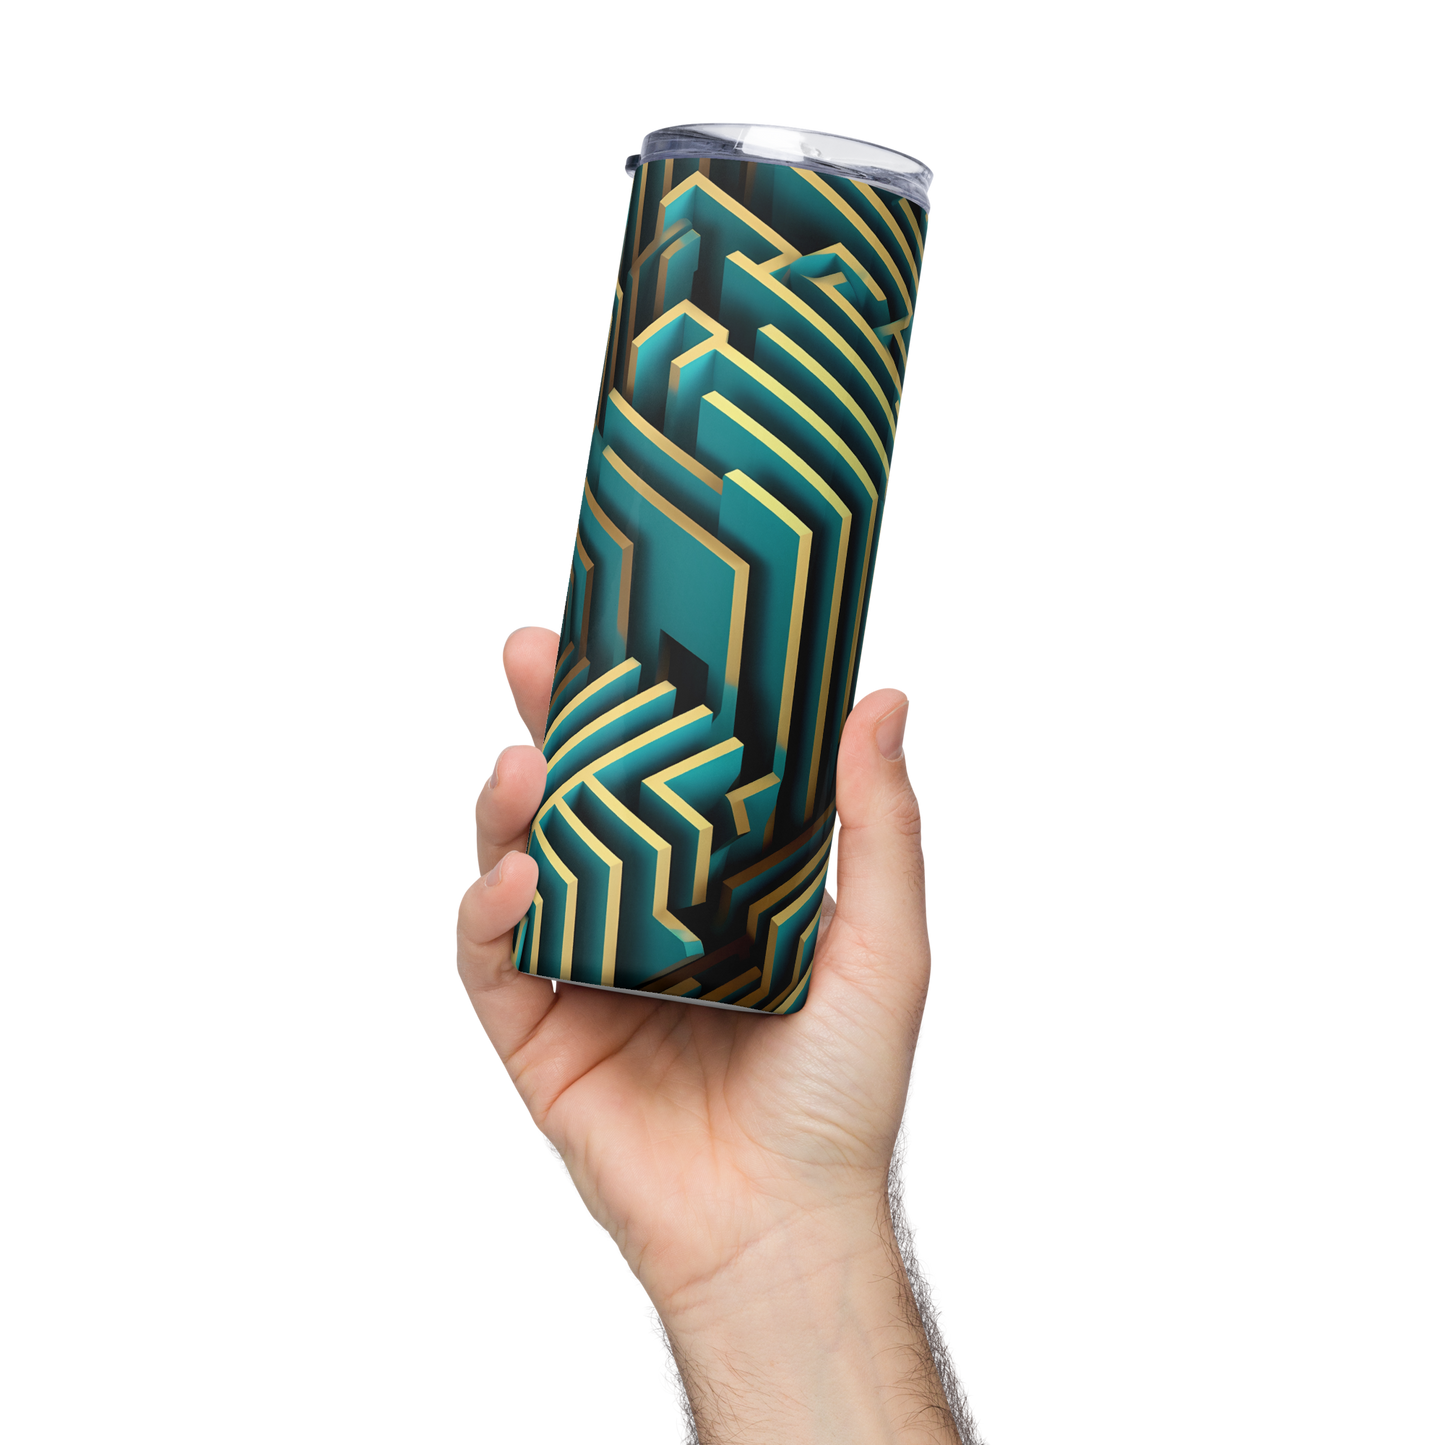 3D Maze Illusion | 3D Patterns | Stainless Steel Tumbler - #5